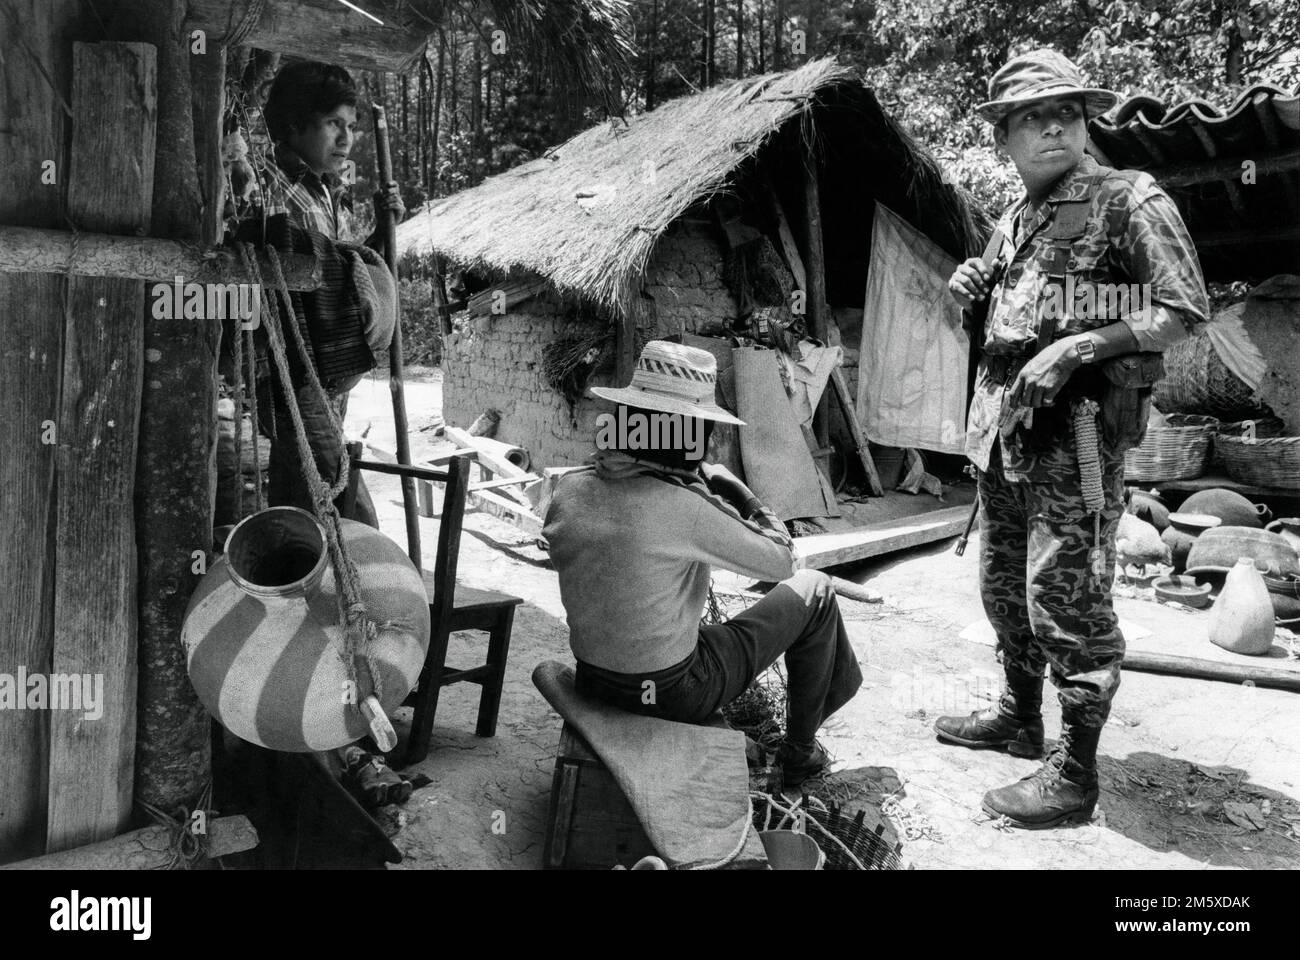 The army on patrol in an Indian village near Chichicastenango after a guerilla operation nearby. Guatemala, March 1982 Stock Photo